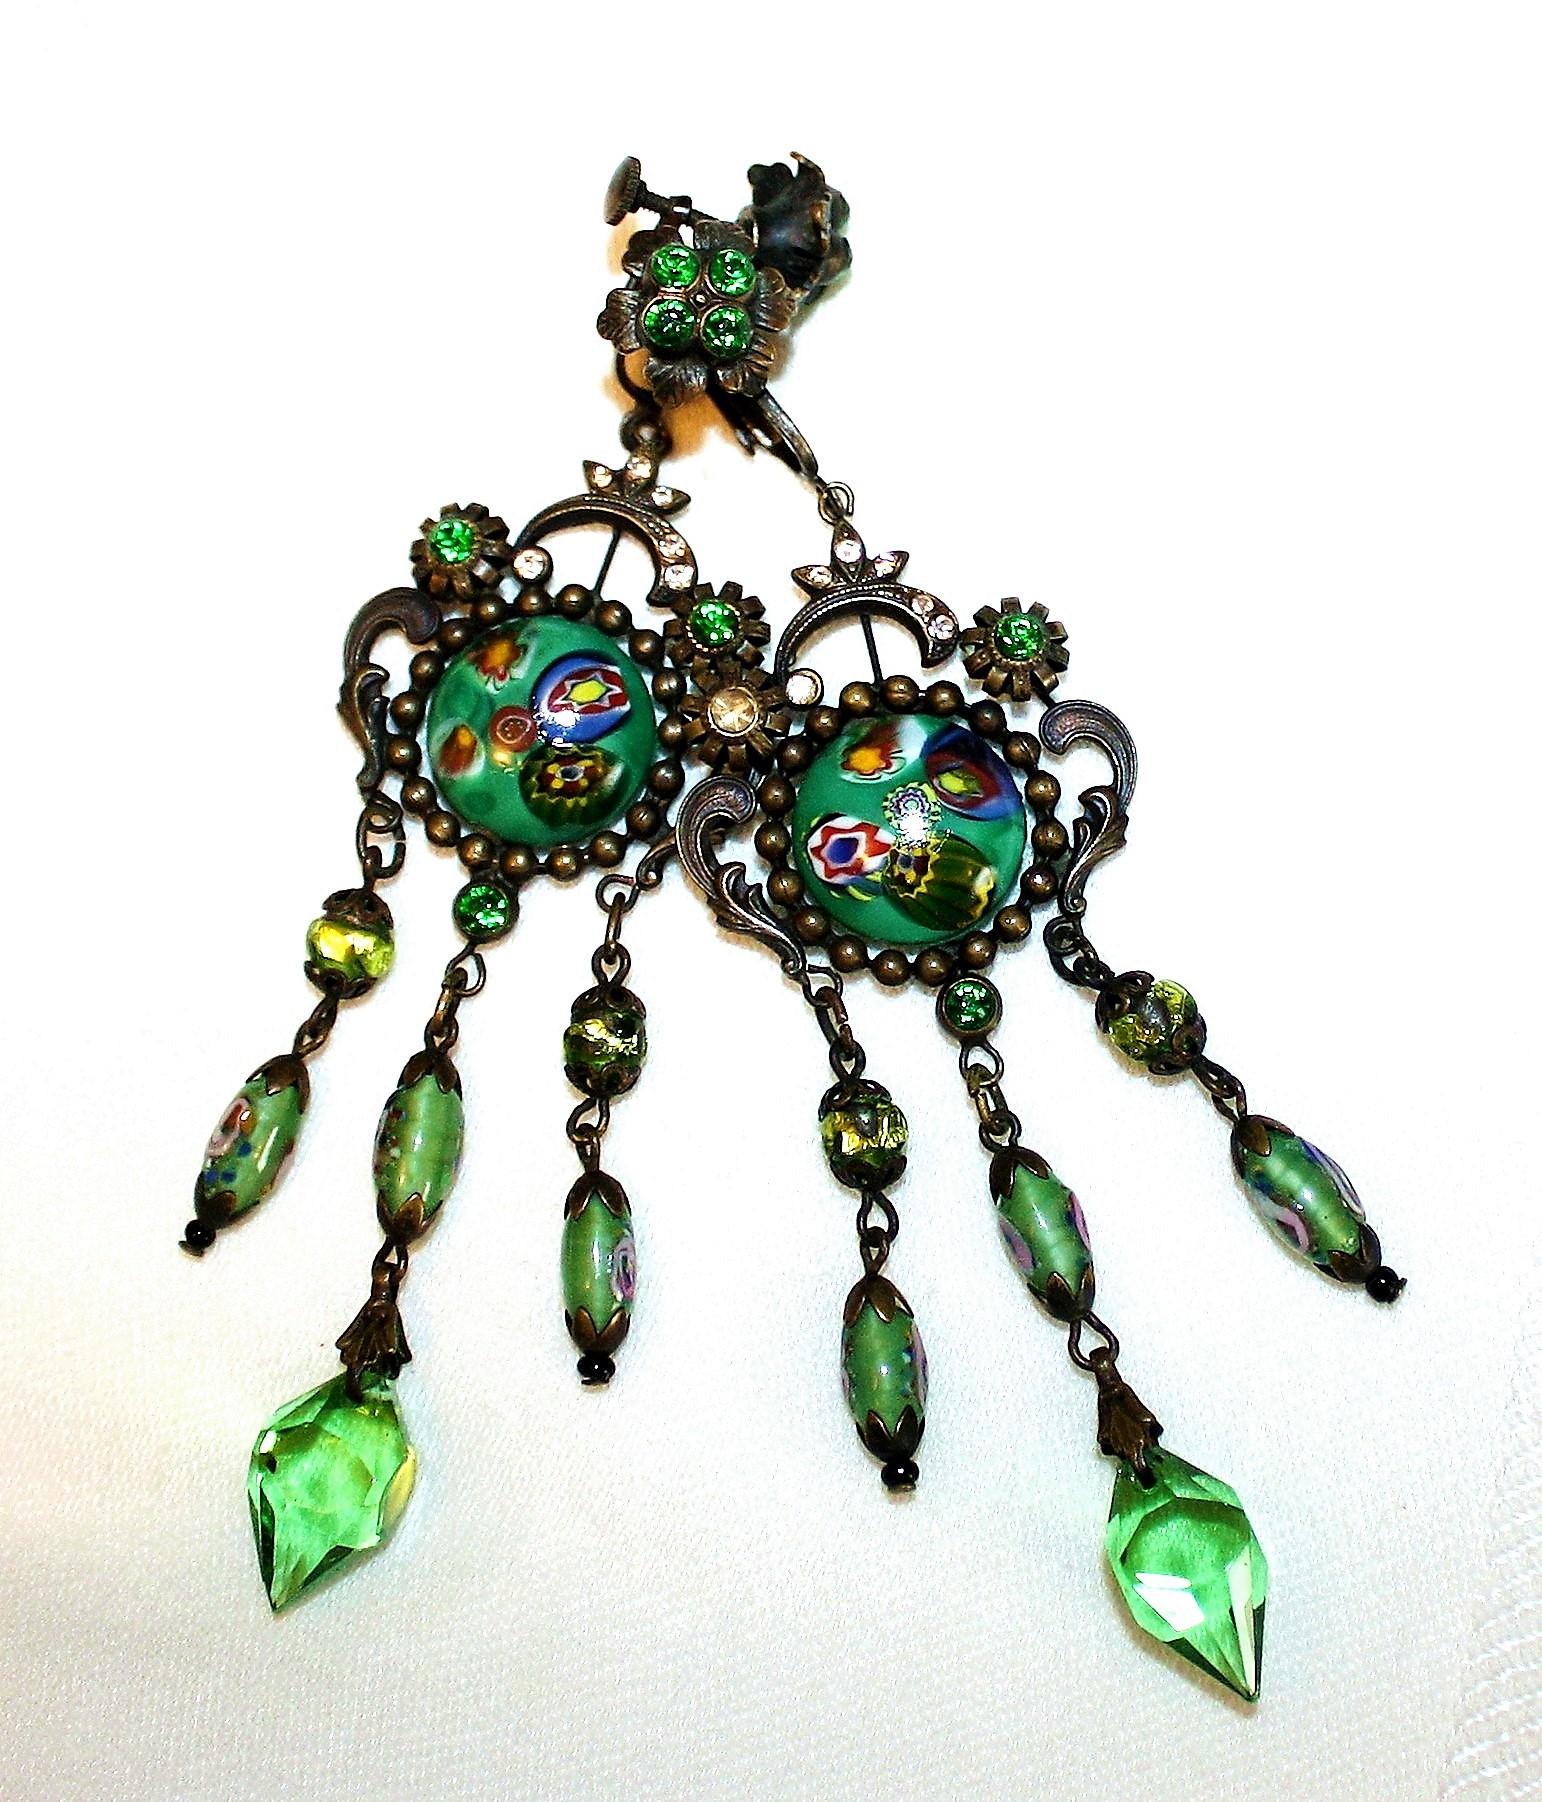 Czechoslovakian long, dangling, darkened brass earrings set with round art glass cabochons and embellished with green and clear faceted glass stones and dangling chains of green glass beads. The backing is a screw/clasp back that allows for tension